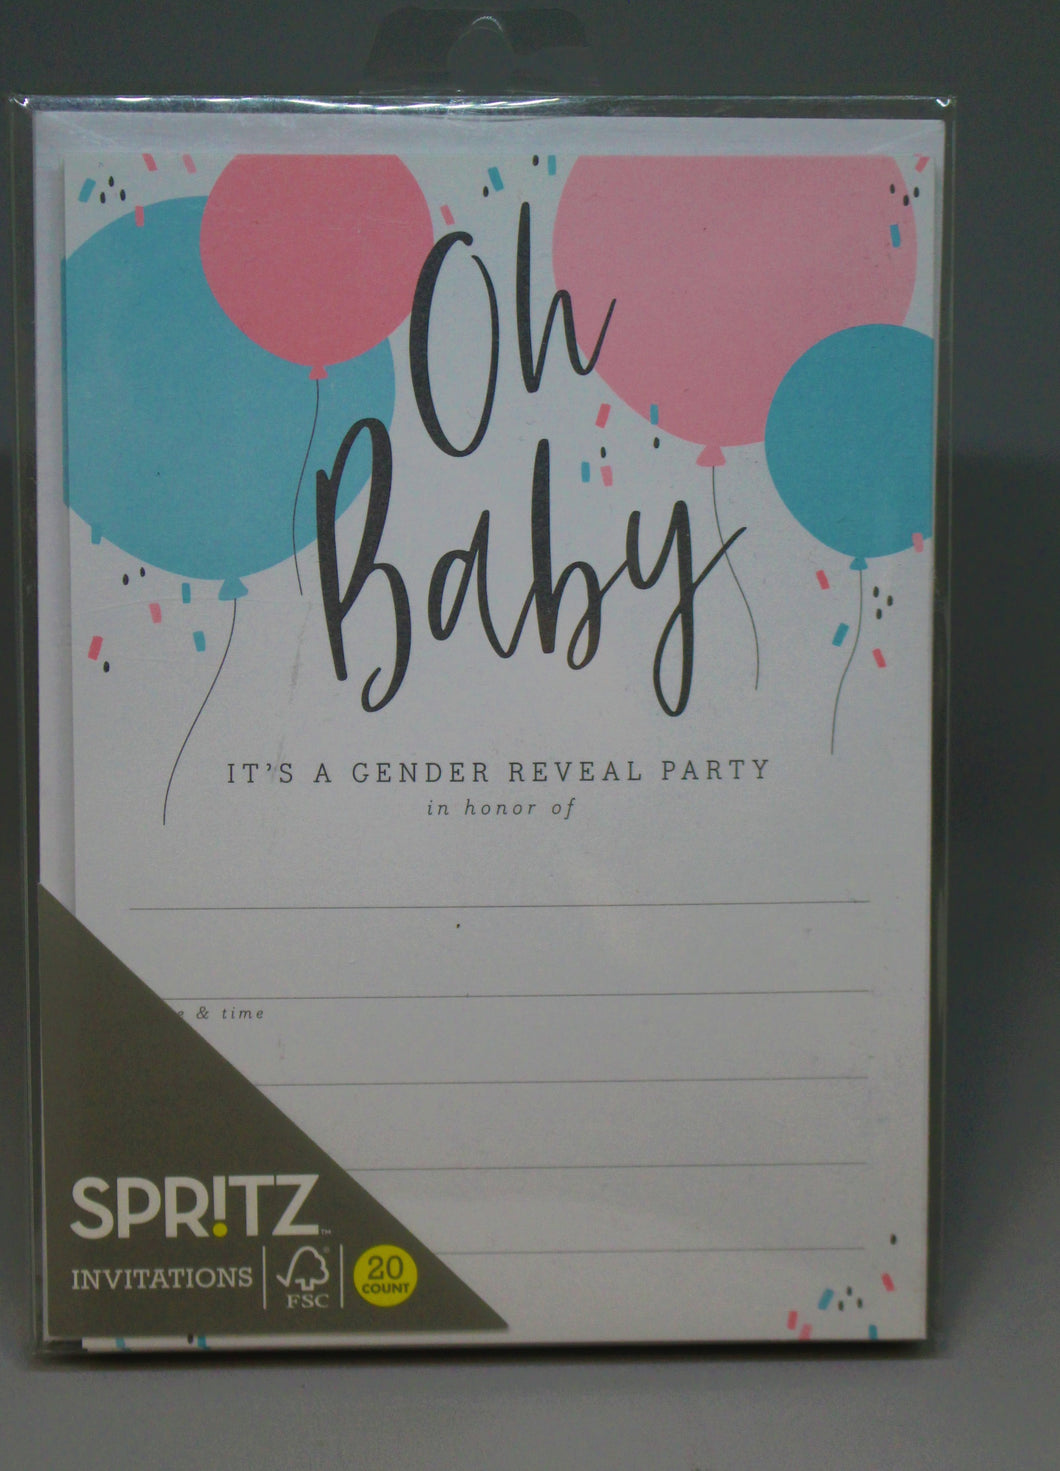 Spritz Oh Baby! Gender Reveal Party Invitations - 20 count - New